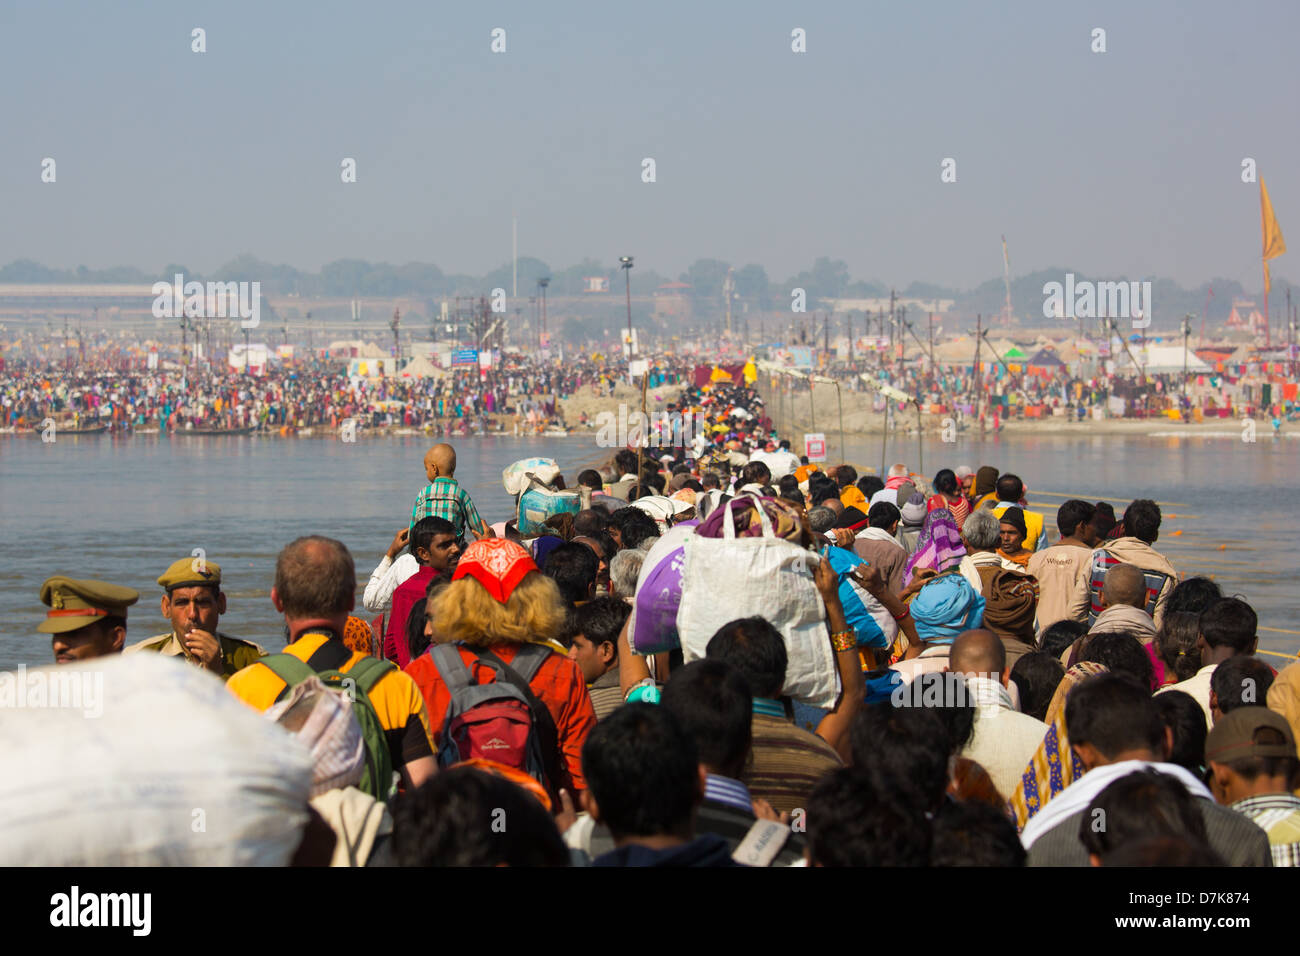 One-way bridges are put in place to help prevent stampedes, Kumbh Mela, Allahabad, India Stock Photo